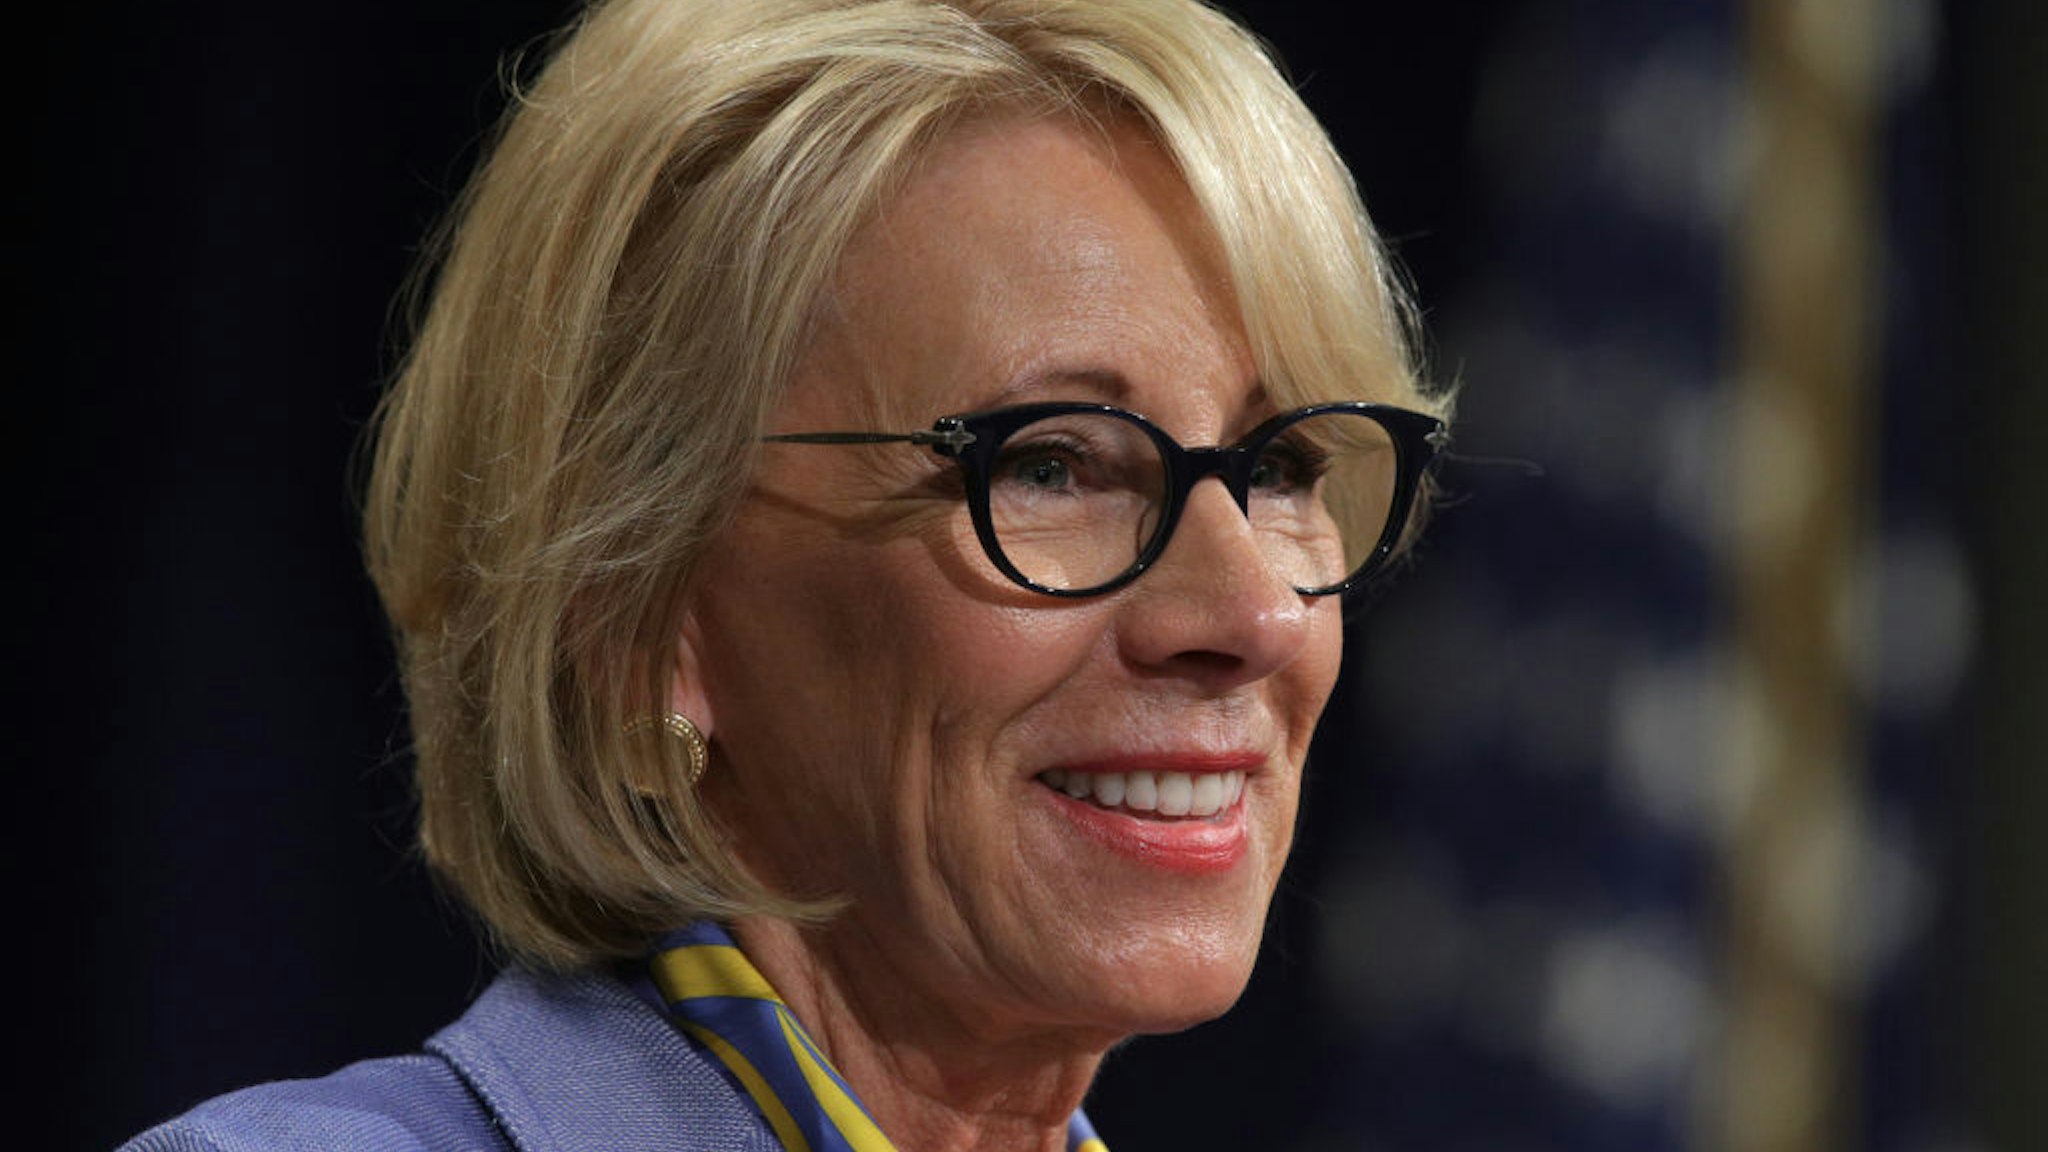 U.S. Secretary of Education Betsy DeVos speaks during a "Combating Anti-Semitism Summit" at the Justice Department July 15, 2019 in Washington, DC.